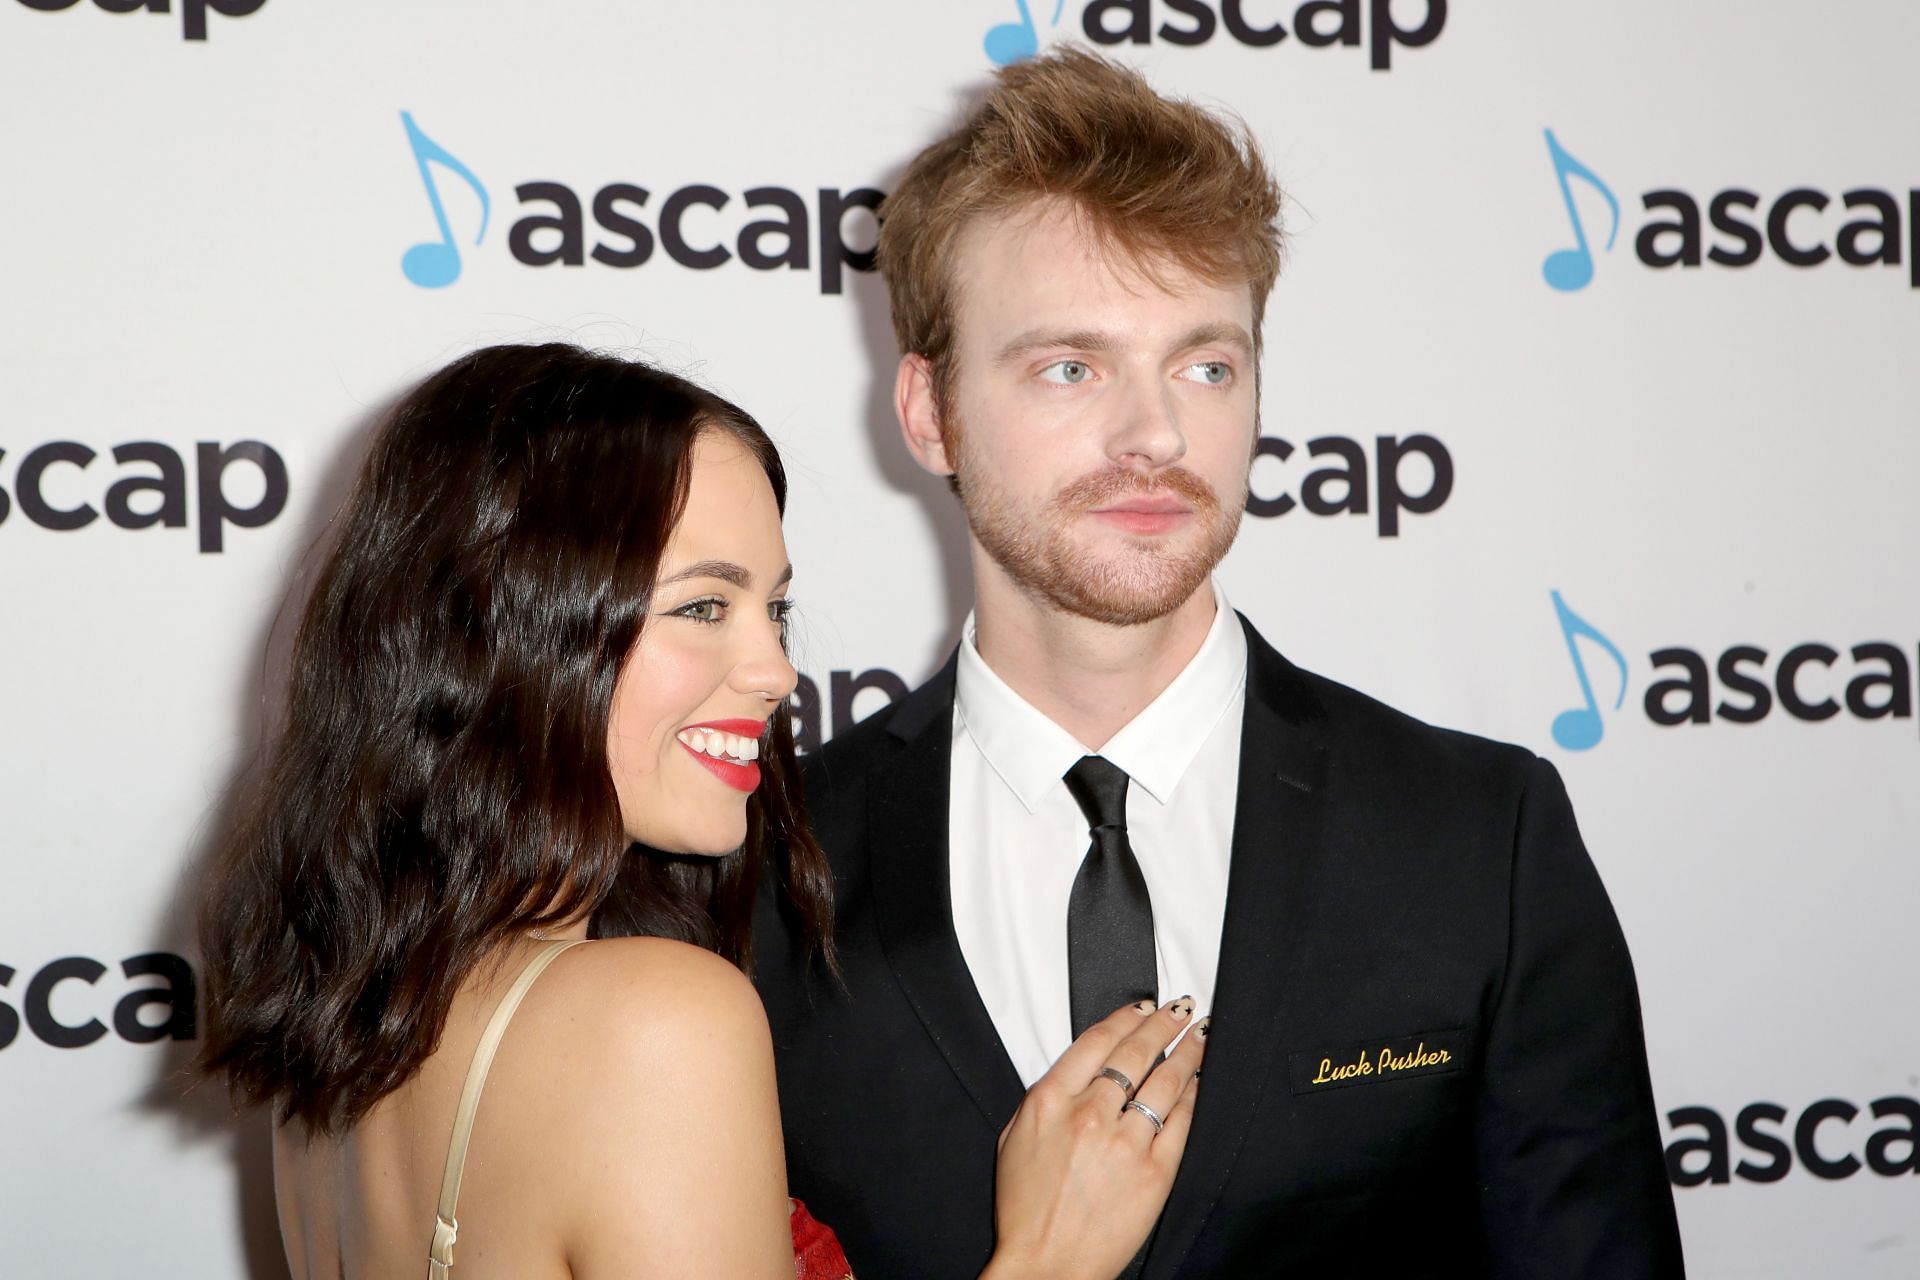 Finneas O&#039;Connell with girlfriend, Claudia Sulewski at The ASCAP 2019 Pop Music Awards (Image via Getty/Ari Perilstein)